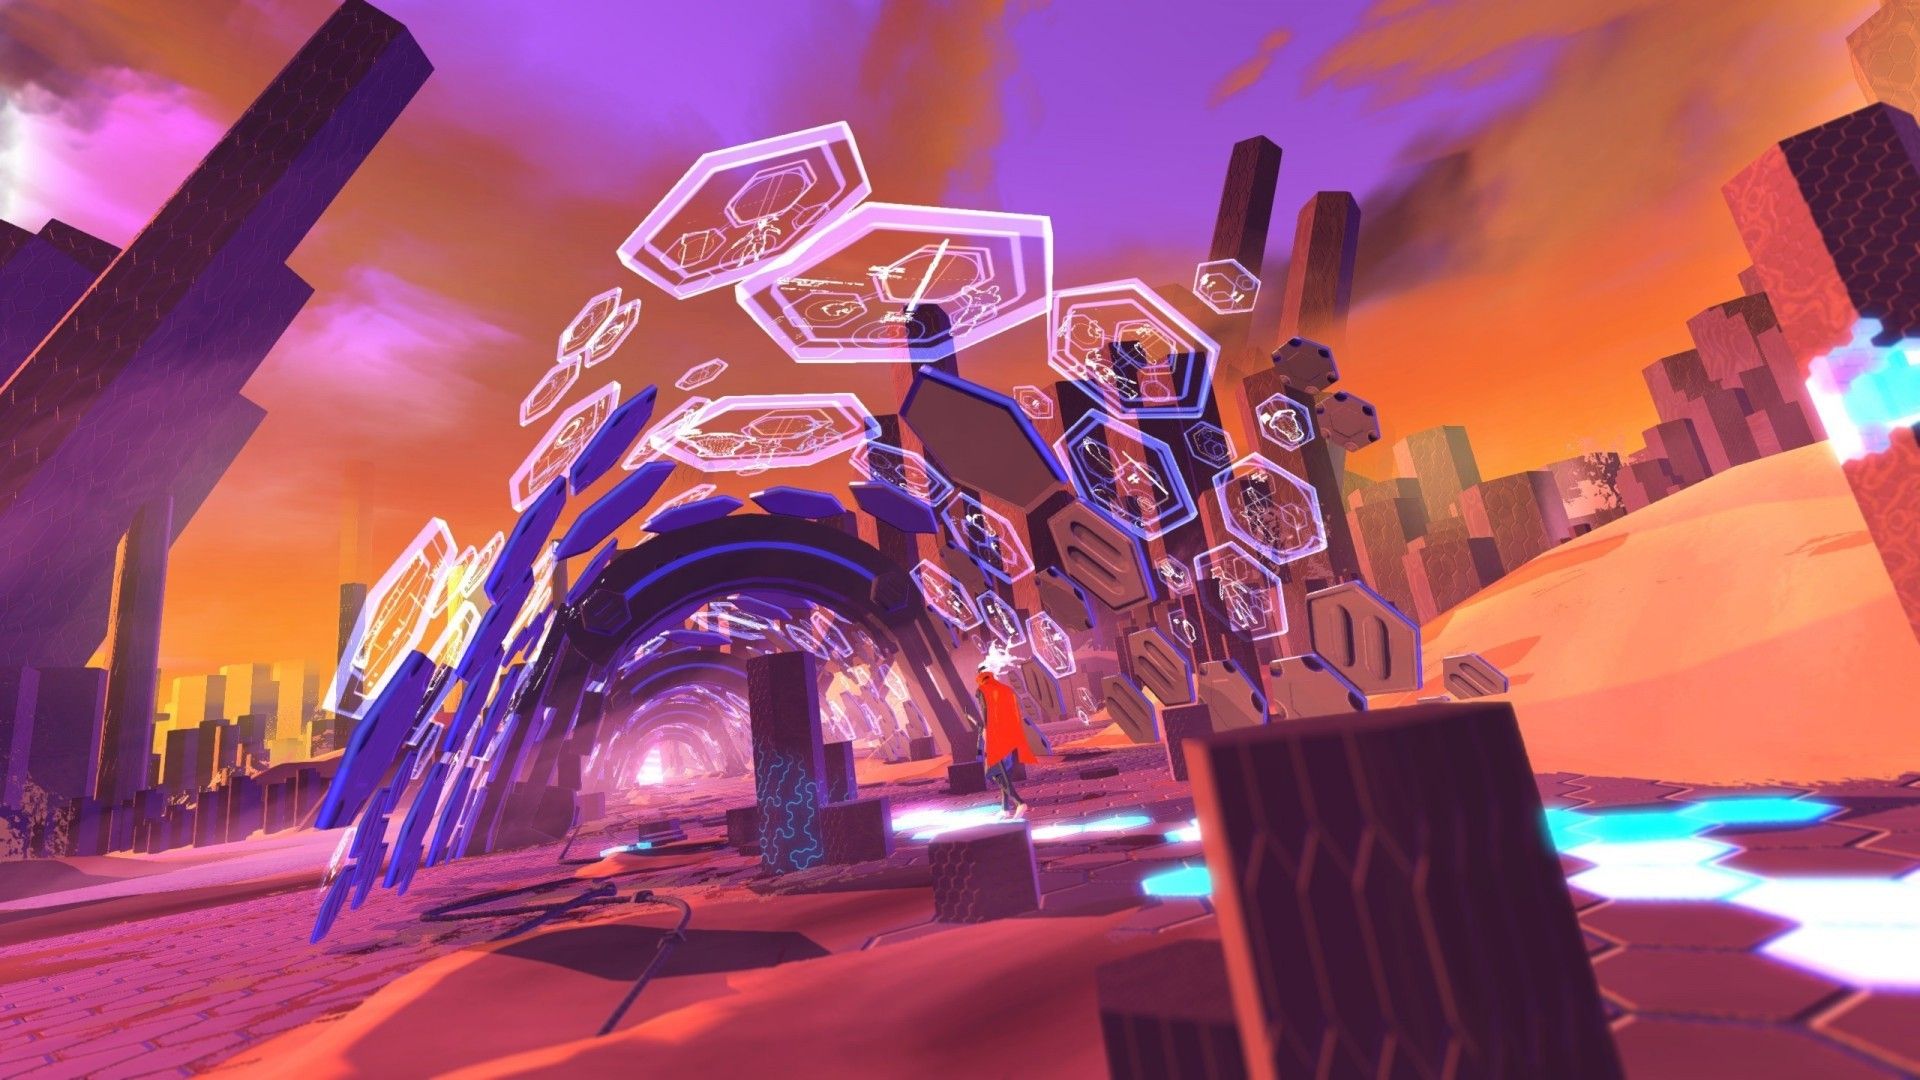 furi review Archives - GameReviewsAU